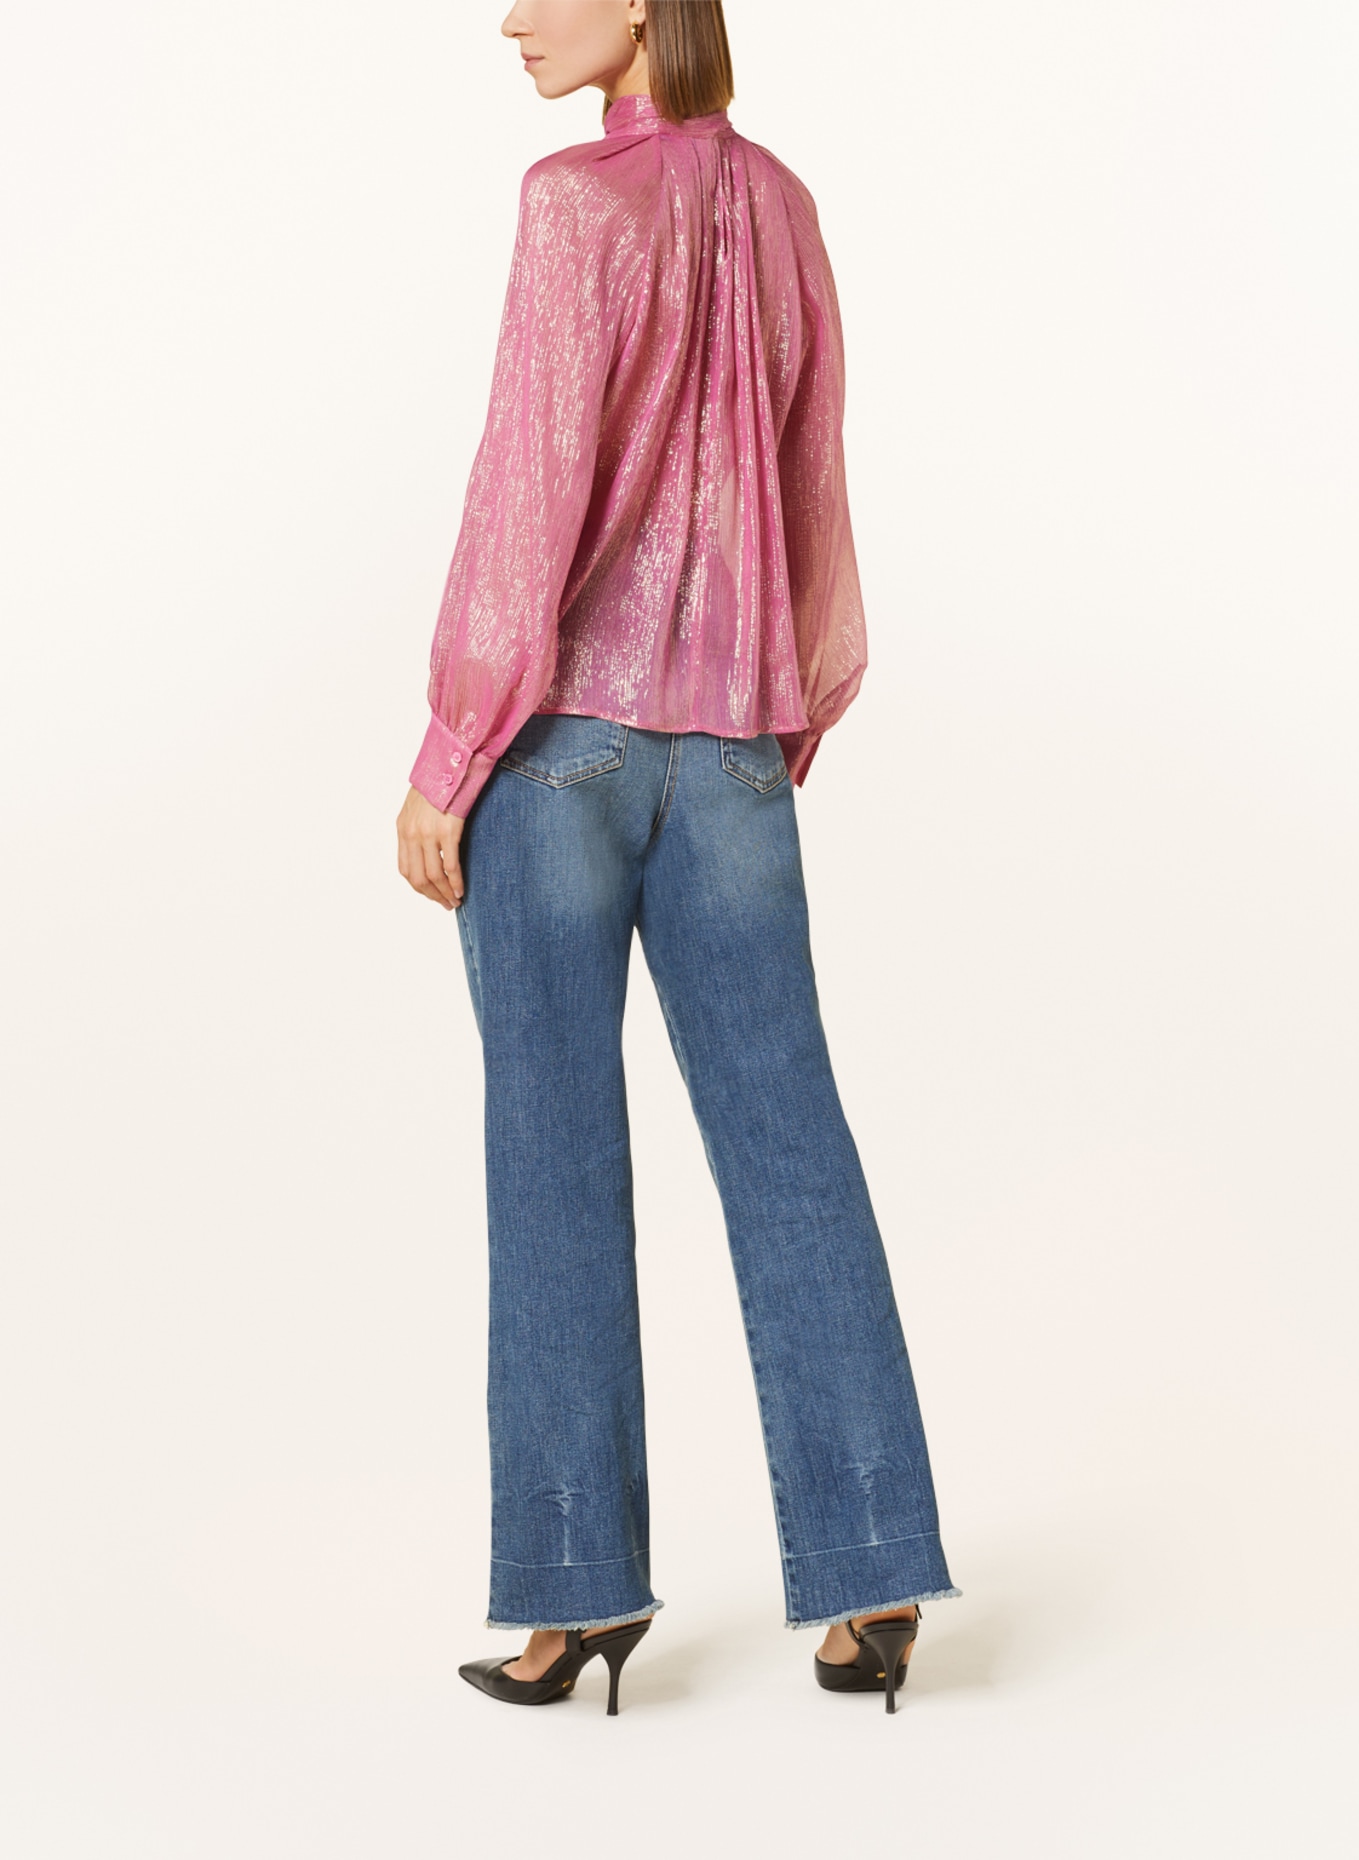 LUISA CERANO Bow-tie blouse in silk with glitter thread, Color: 4305 the silk lamé (Image 3)